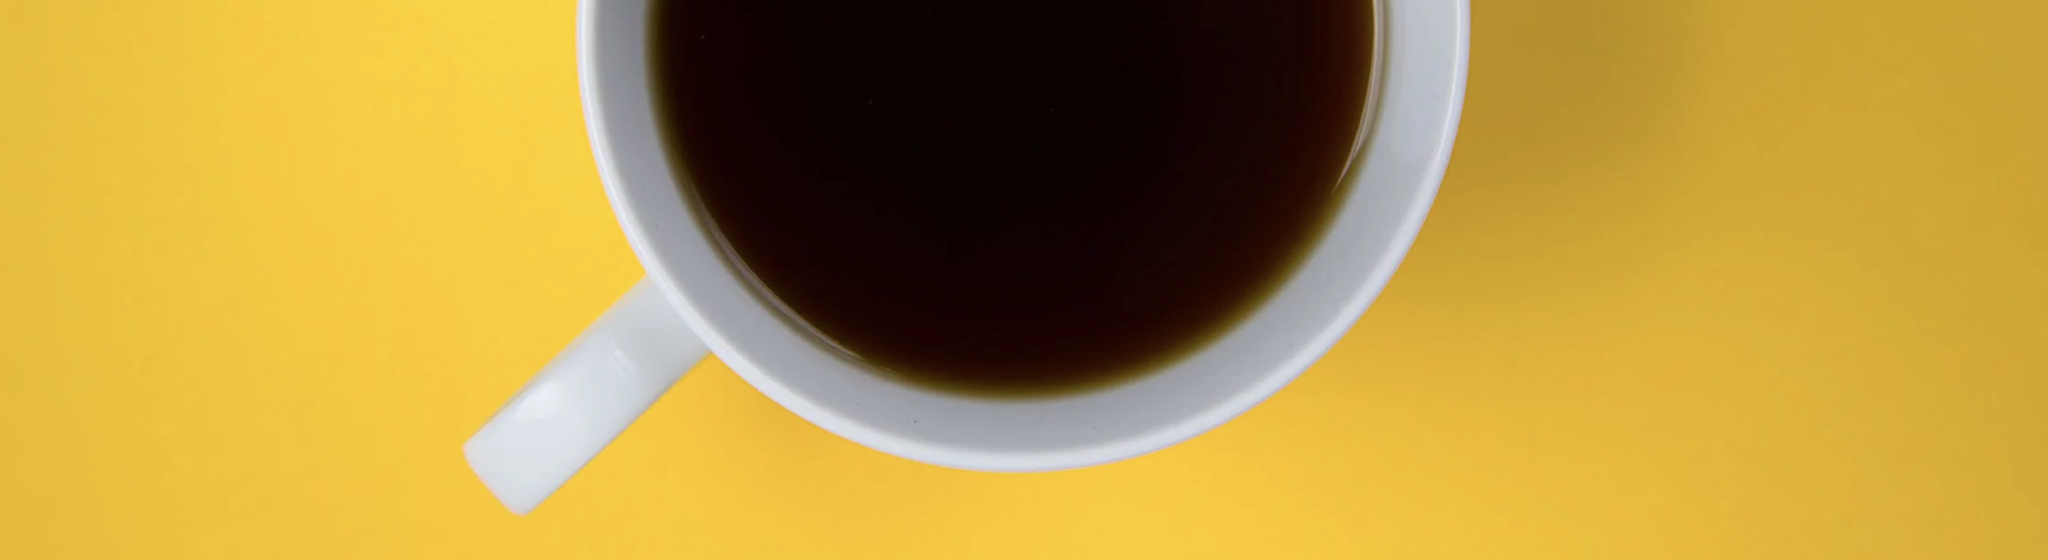 Cup on yellow background